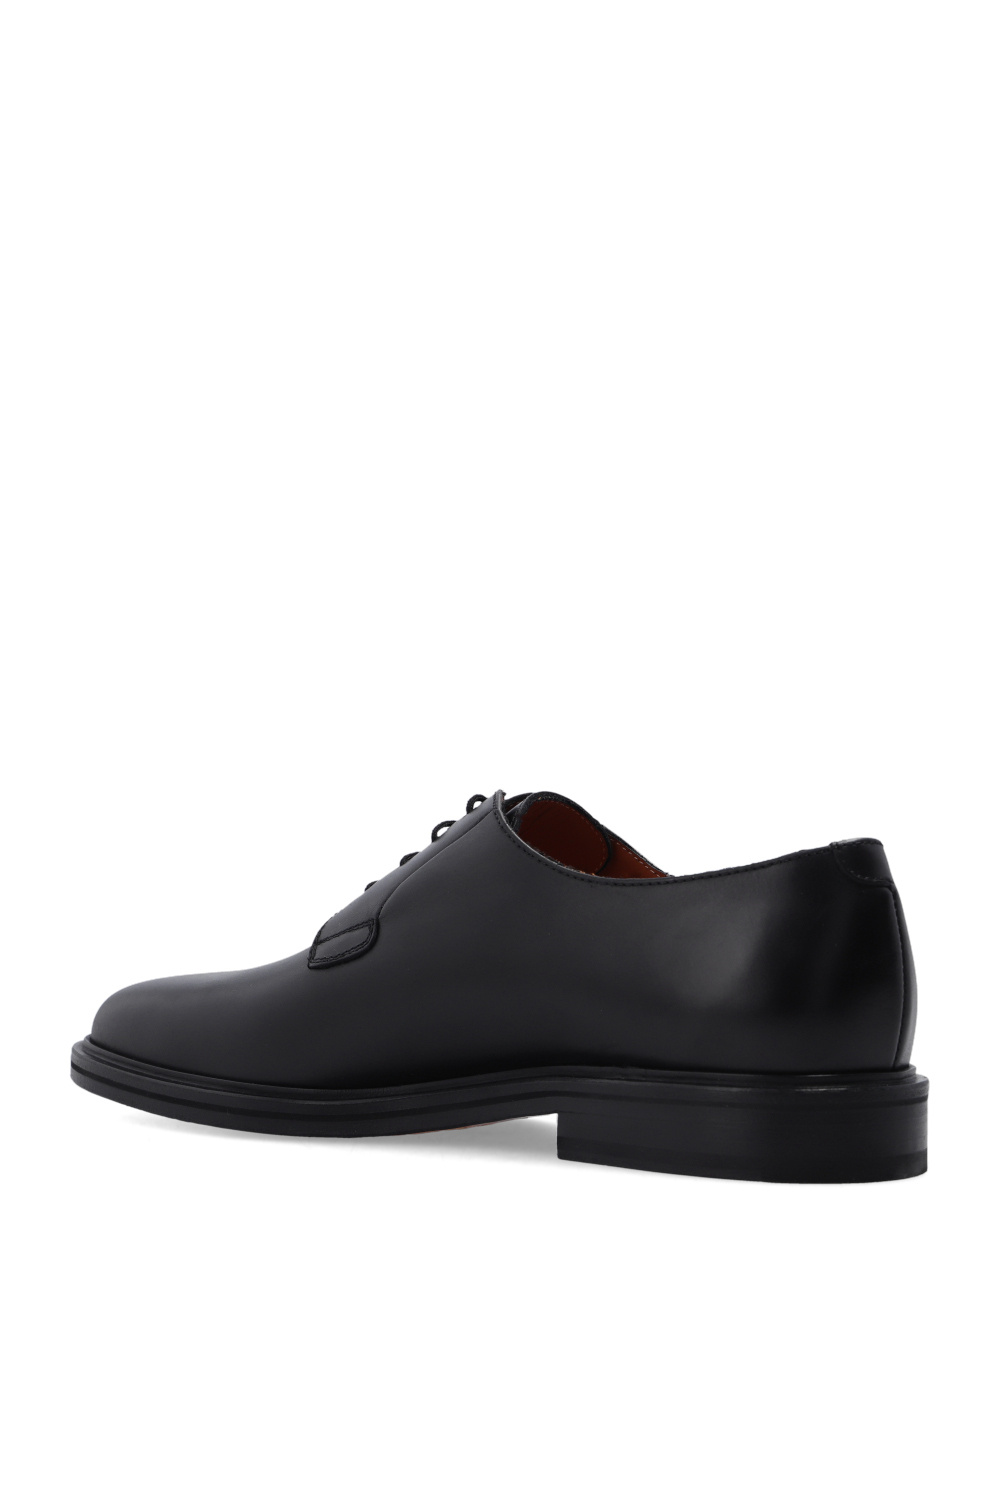 Common Projects Black Type 123 Leather Derby Shoes